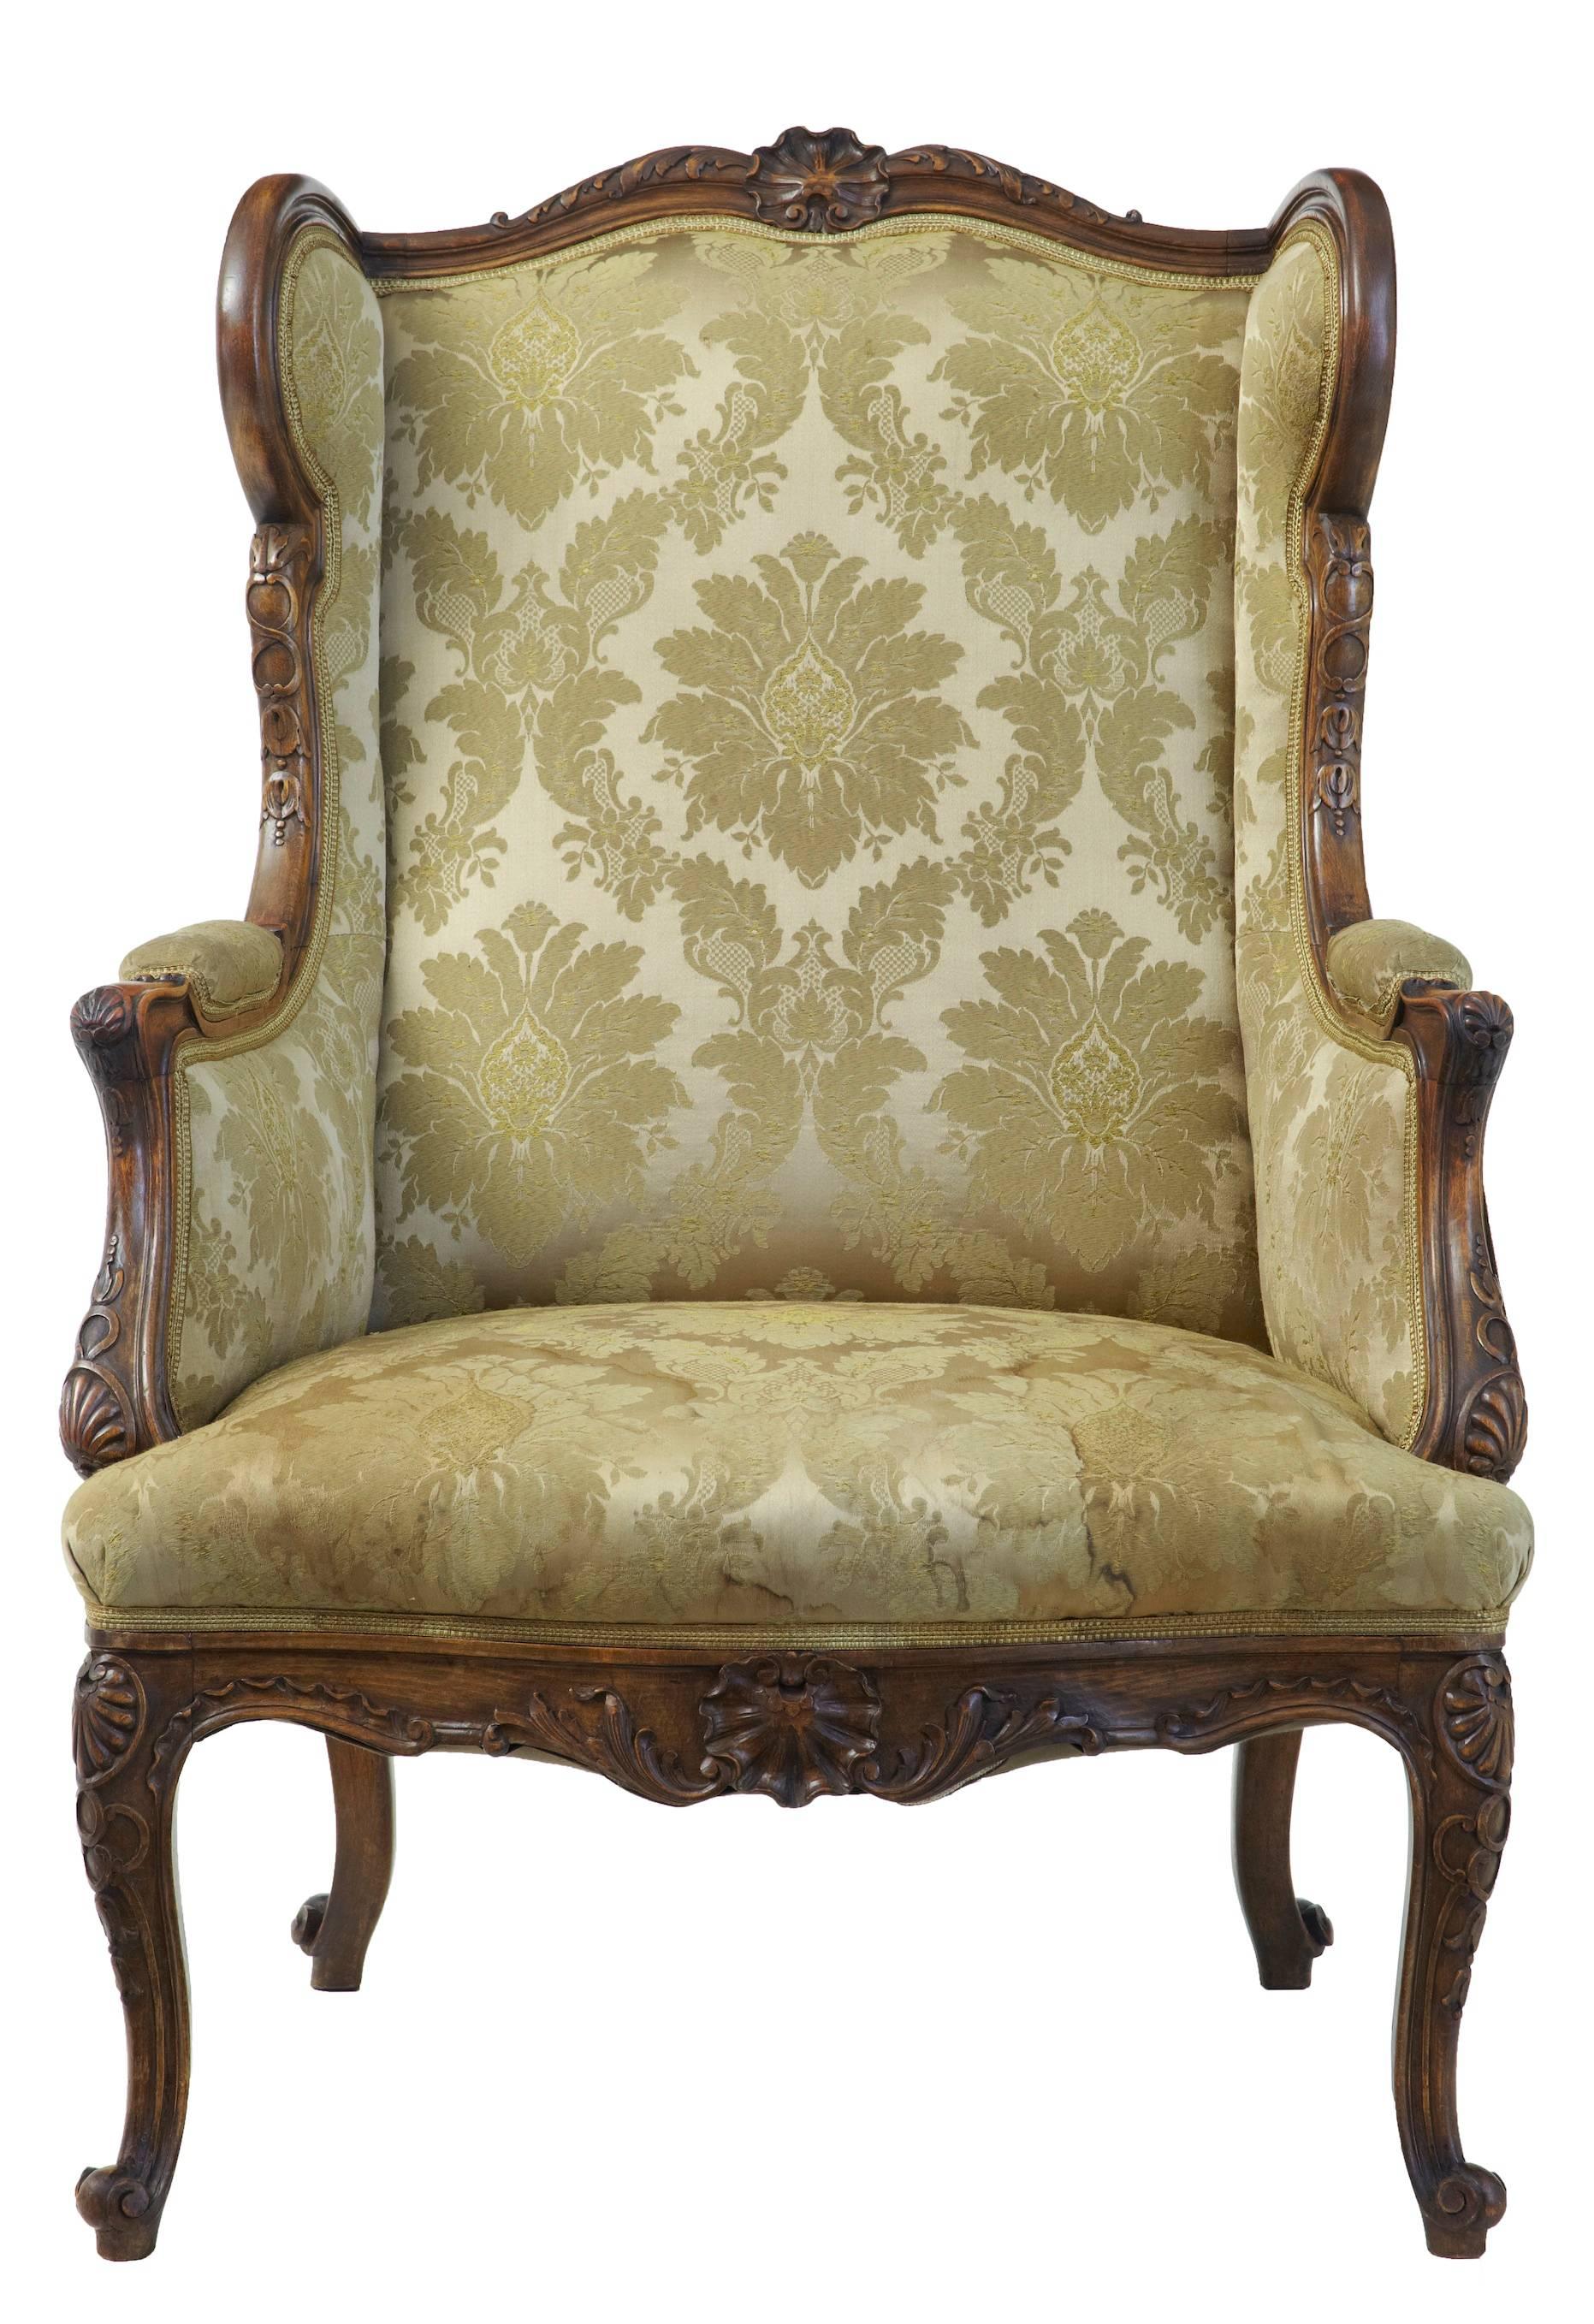 Victorian 19th Century Carved Walnut French Armchair